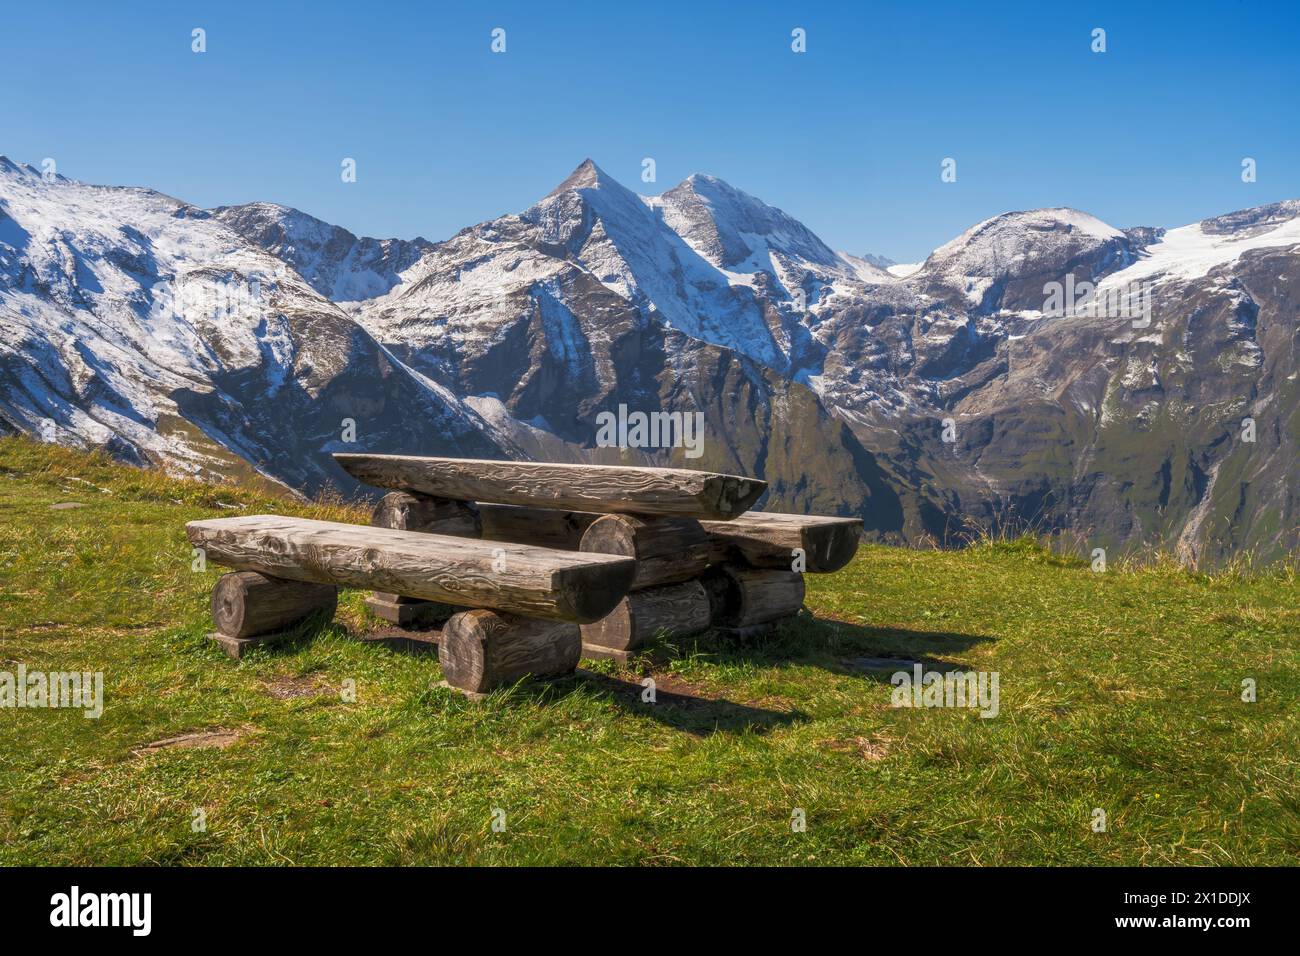 Picnic area at the Grossglockner hig alpine road  in the High Tauern mountains Stock Photo